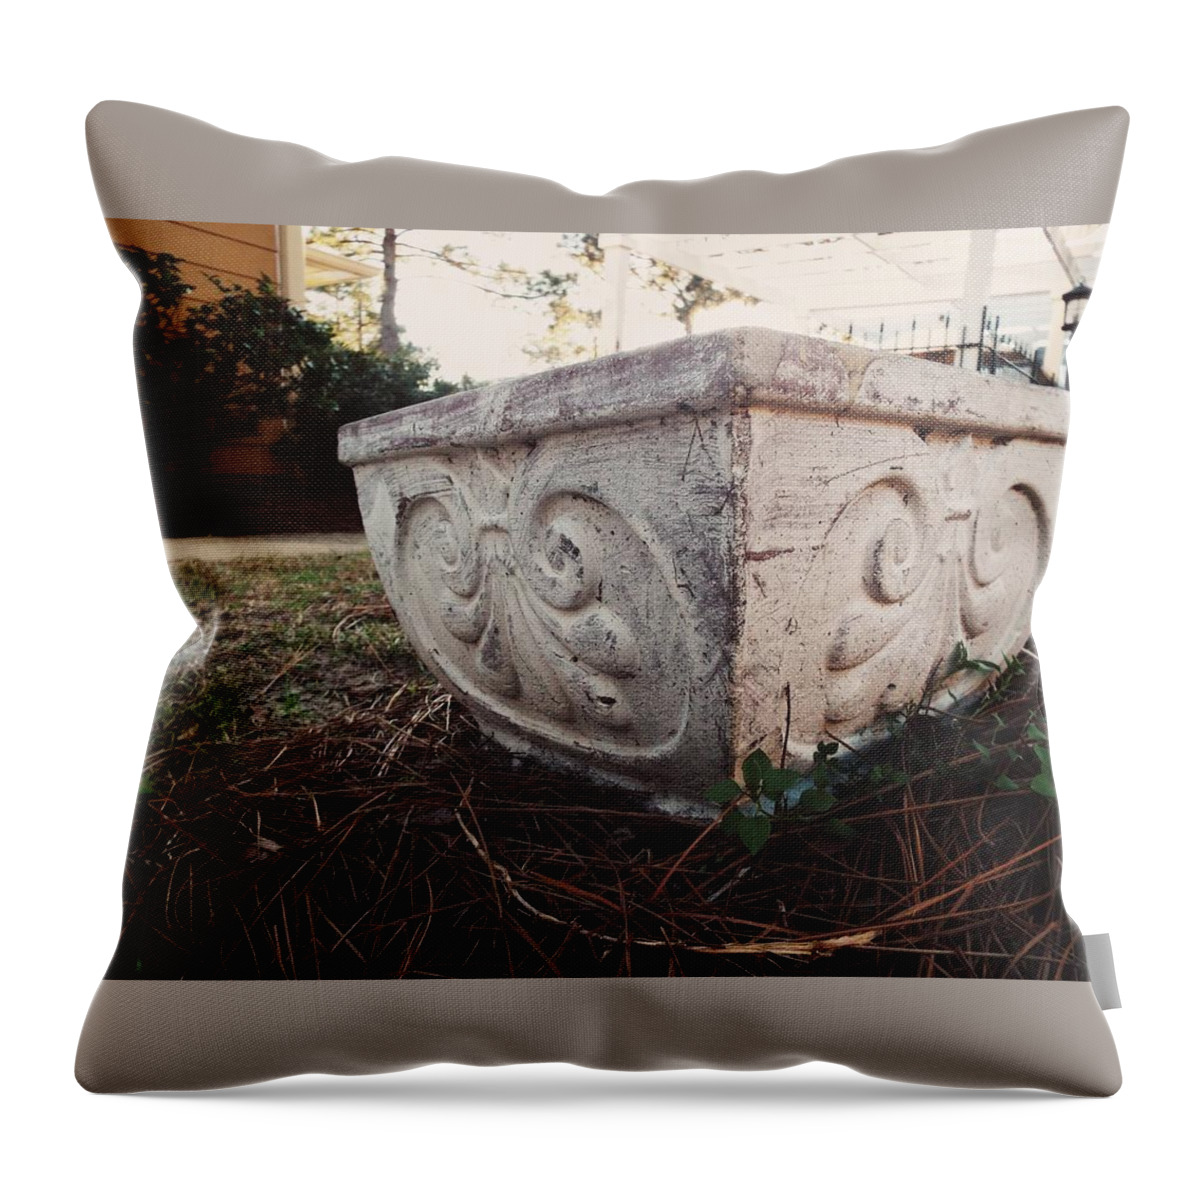 Outdoors. Pottery. Garden Pot. Flower Pot. Plant Pot. Faded White Paint. Antique White Paint. Distressed White Paint. Grass. Pine Straw. Bushes. Lamp Post. Royal. Throw Pillow featuring the photograph Fancy Pottery by Shelby Boyle